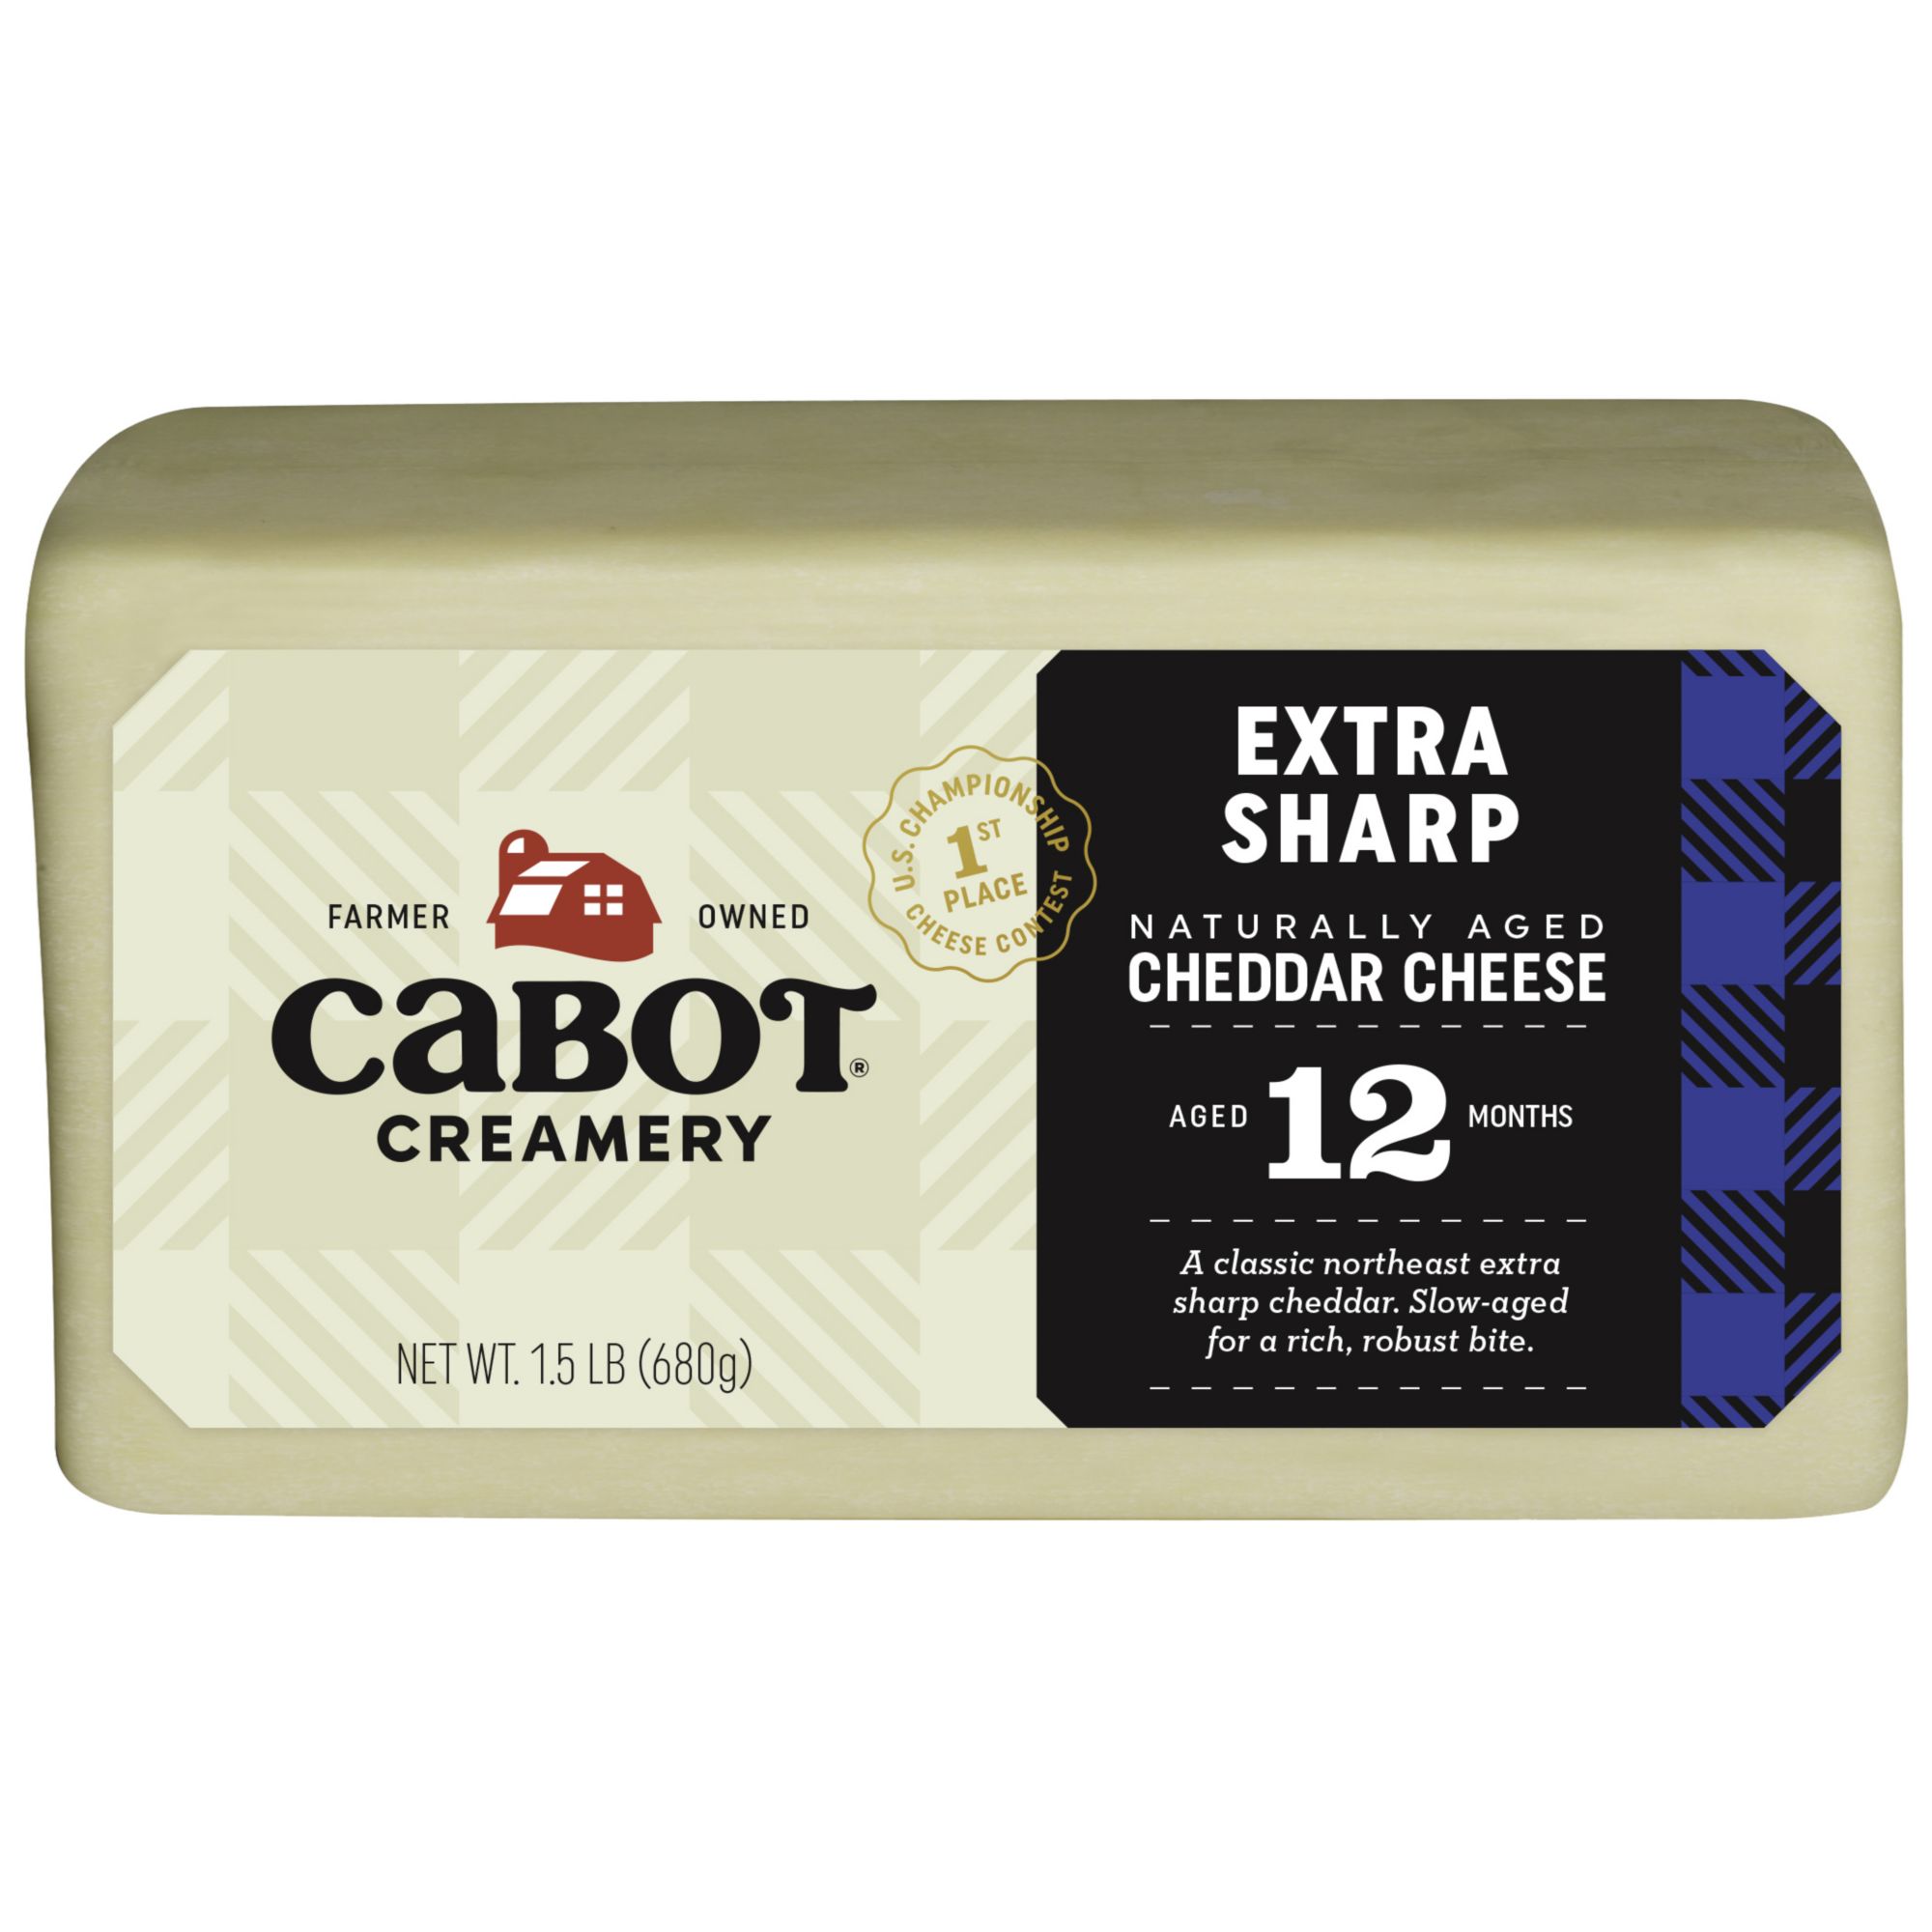 Cabot Creamery Extra Sharp Naturally Aged Cheddar Cheese, 1.5 lbs.